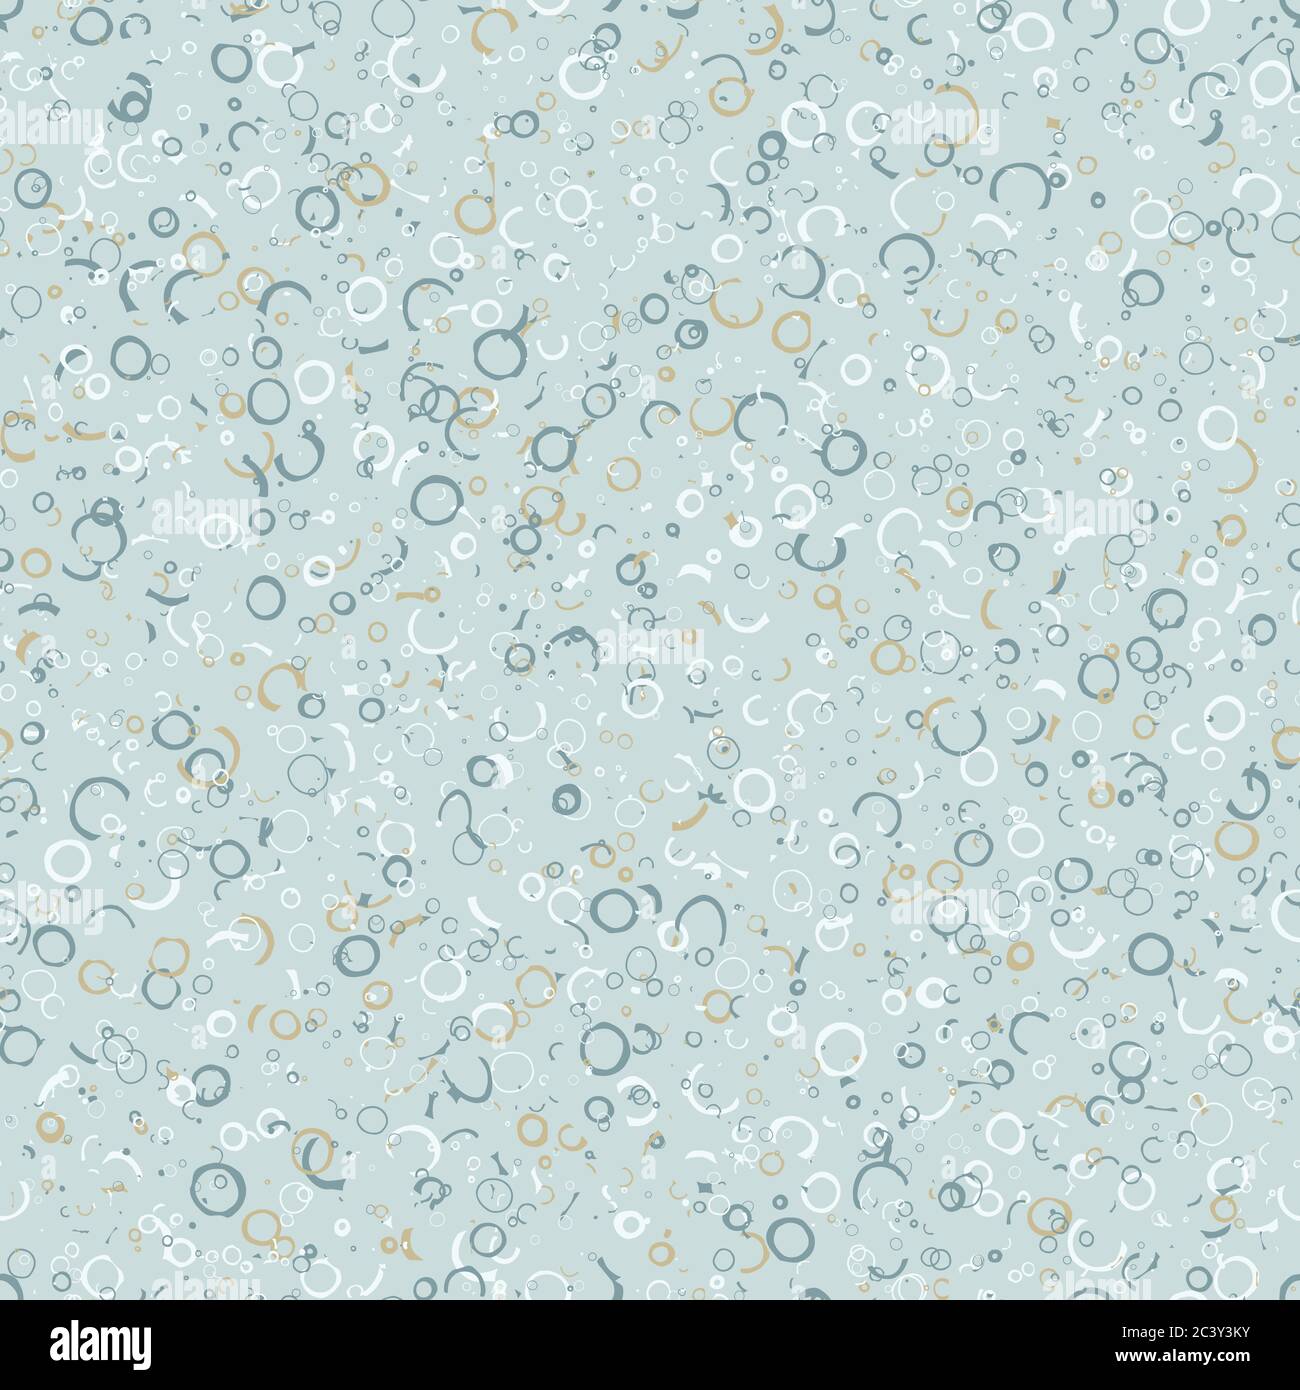 White Craft Paper Speckle Seamless Vector Stock Vector (Royalty